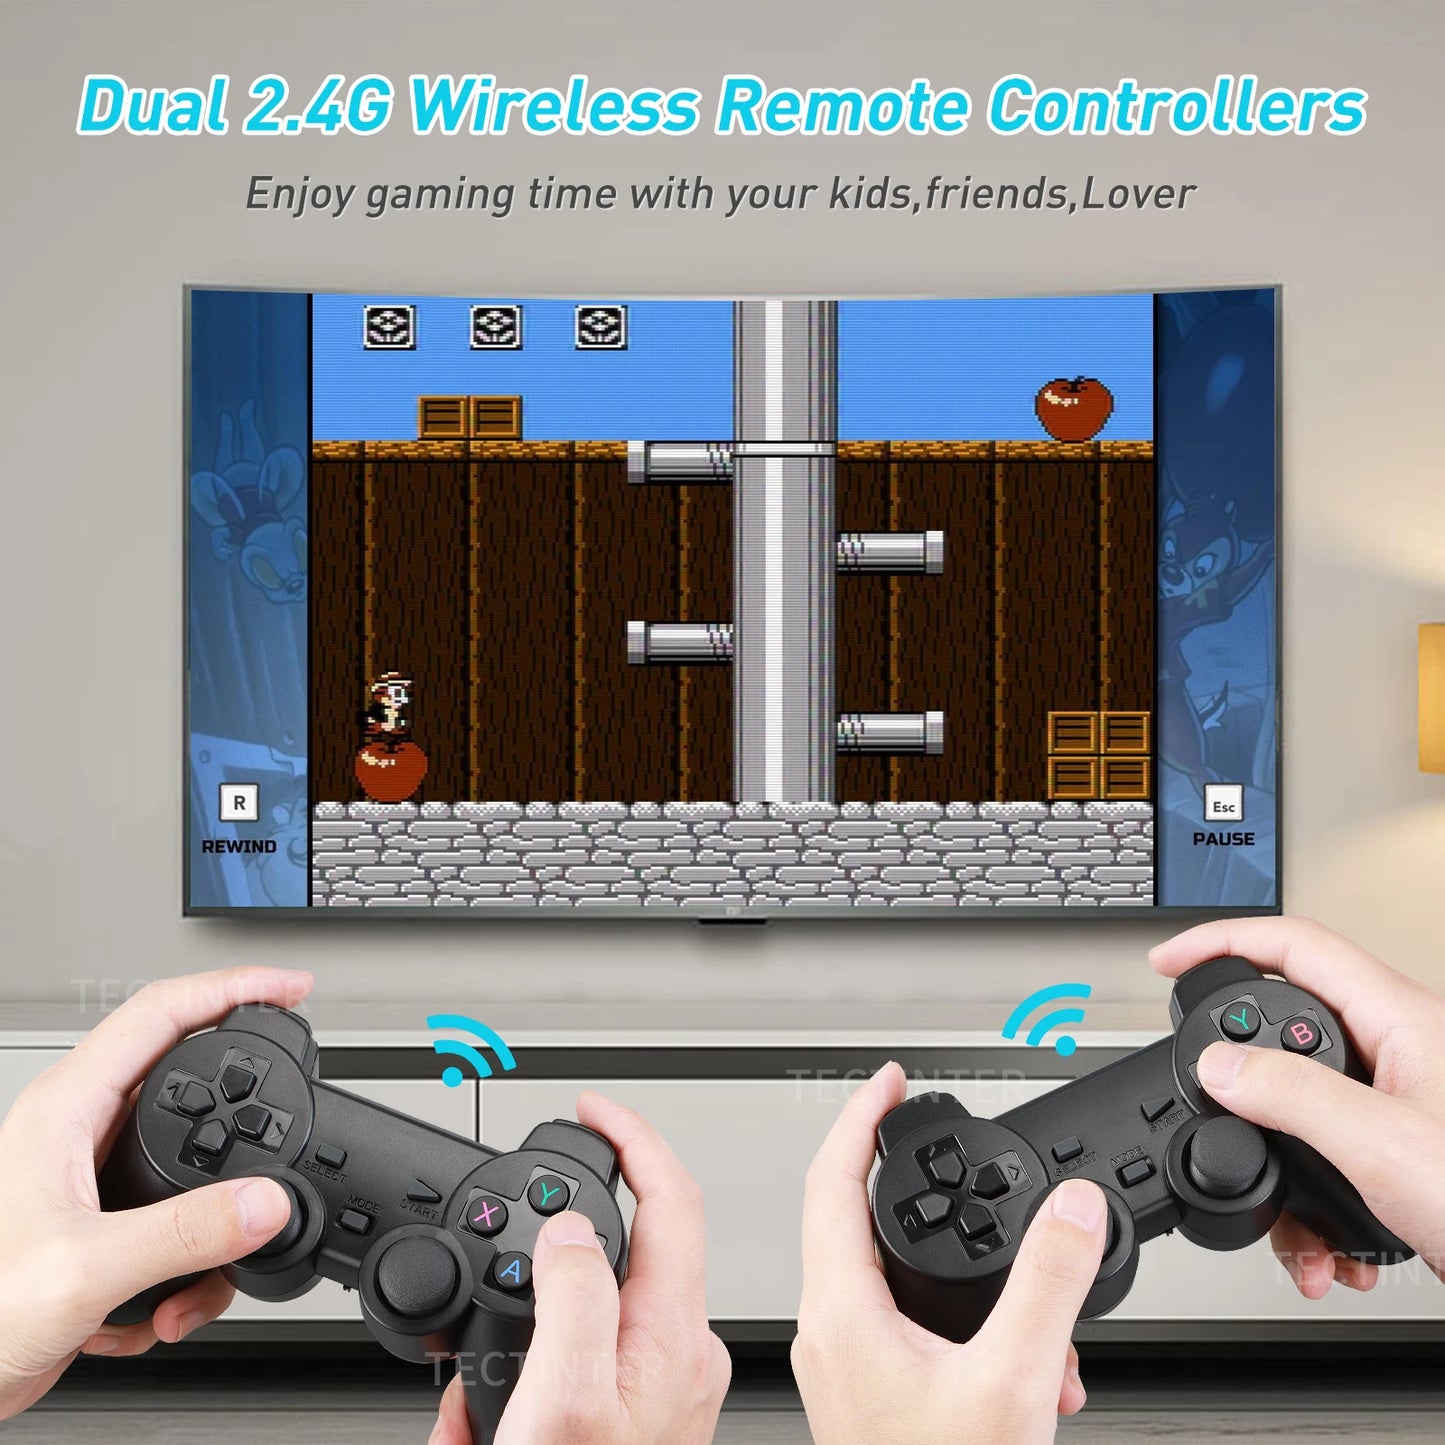 Video Game Console Built-in 20000+ Games Retro Handheld Game Player 64G 4K TV Game Stick 2.4G Wireless Controller Gamepad